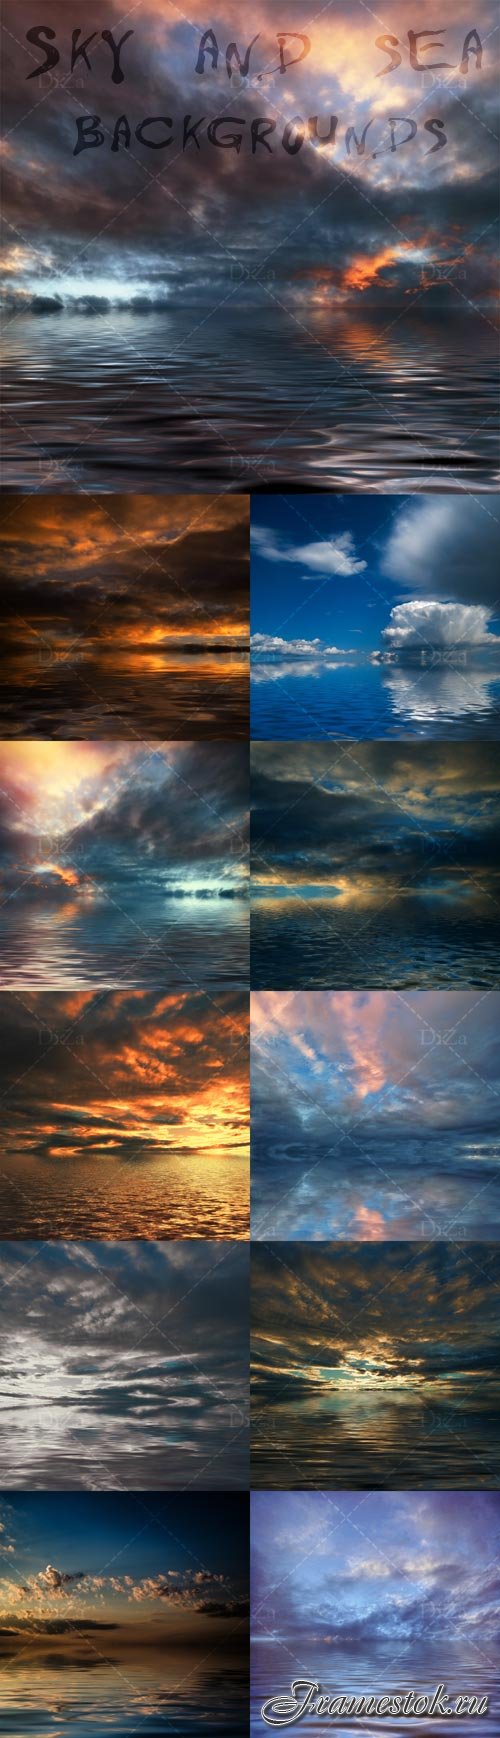 Sky and sea backgrounds